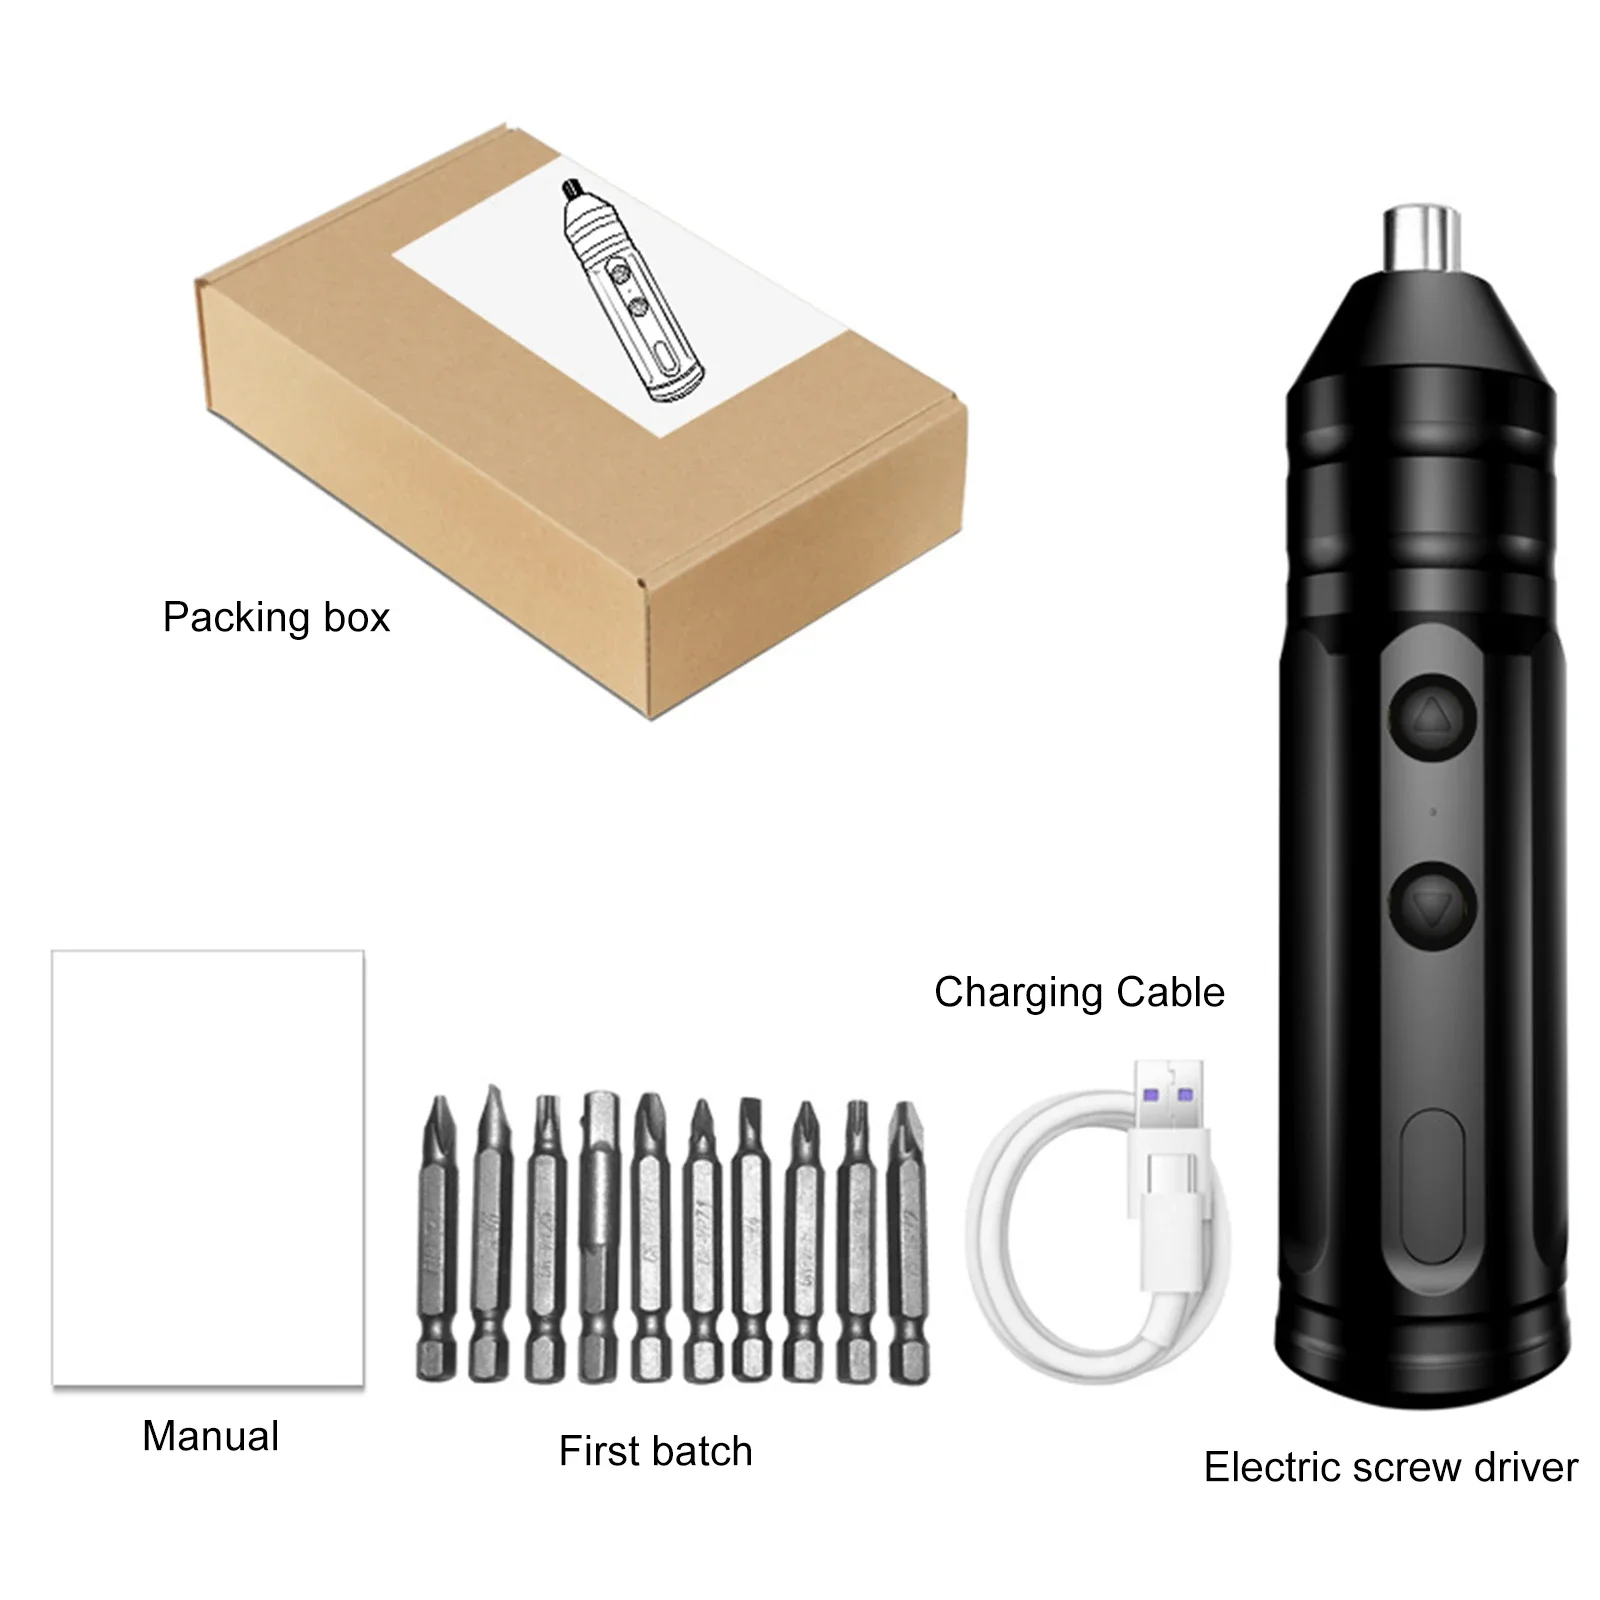 Mini Cordless Electric Screwdriver, Portable Power Tools Set, Rechargeable, Multifunctional, Electrical Screw Driver